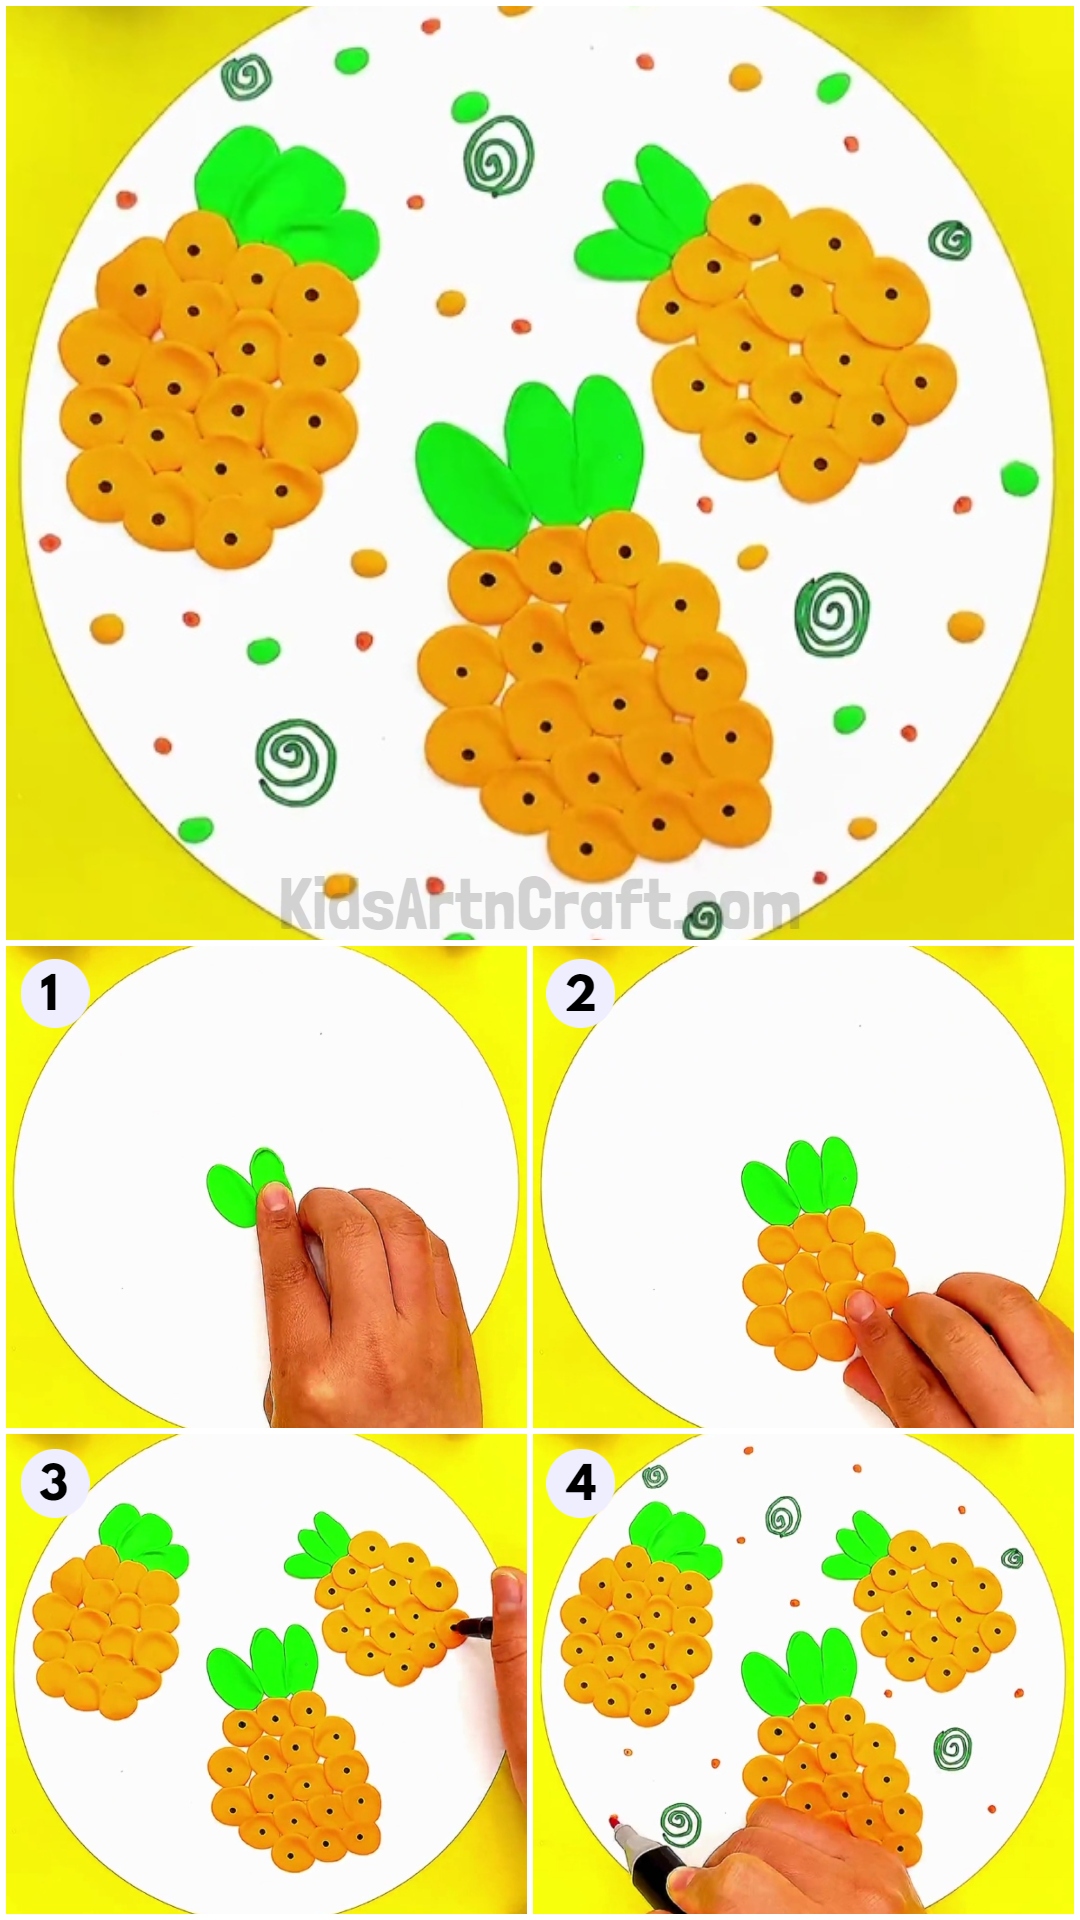 How To Make Pineapples Craft Using Colored Clay Idea